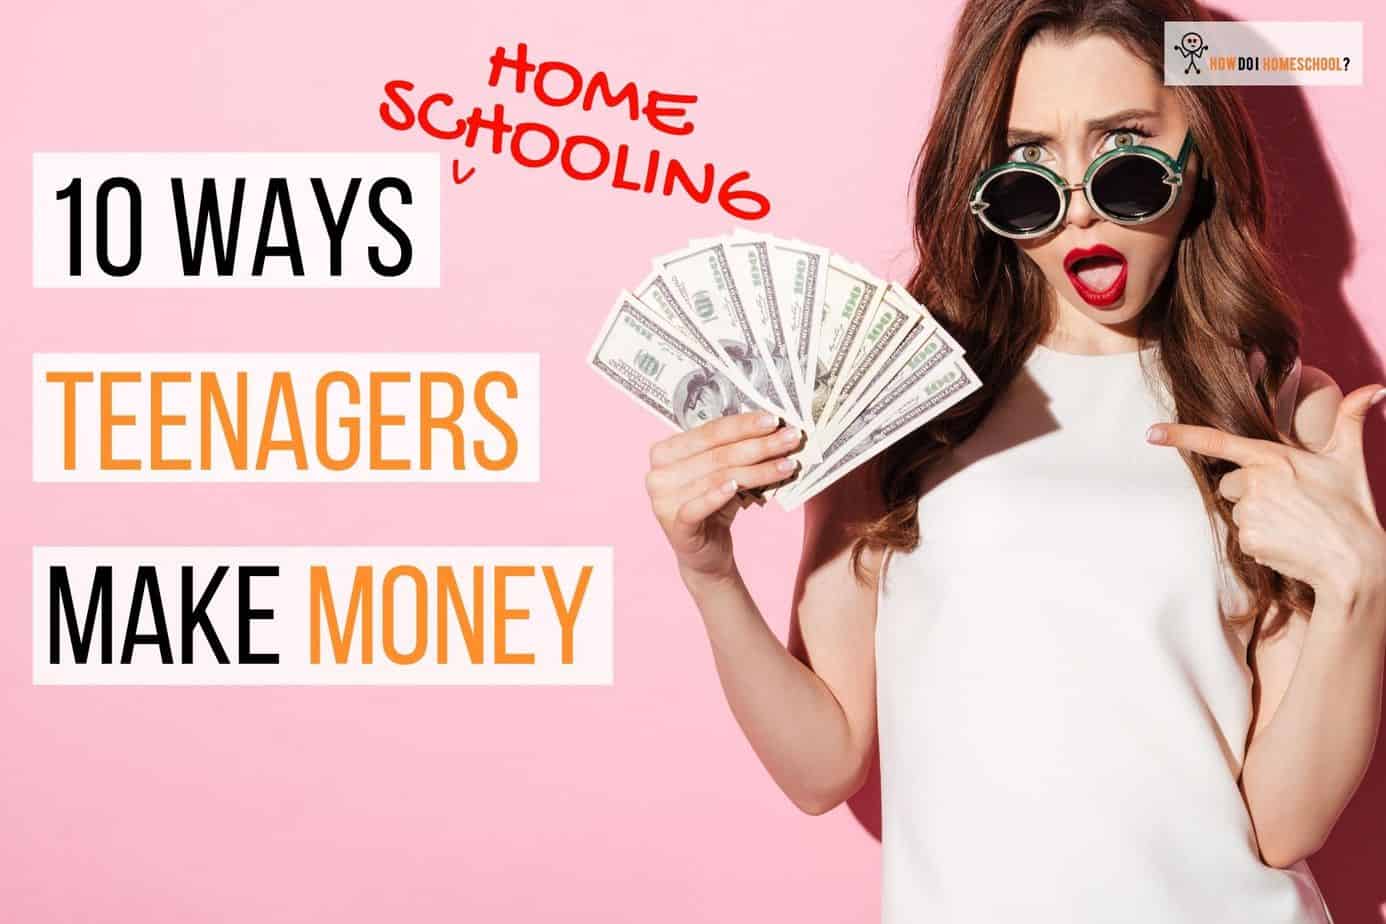 How To Make Money At Home As A Teenager : !!!How to make money as a